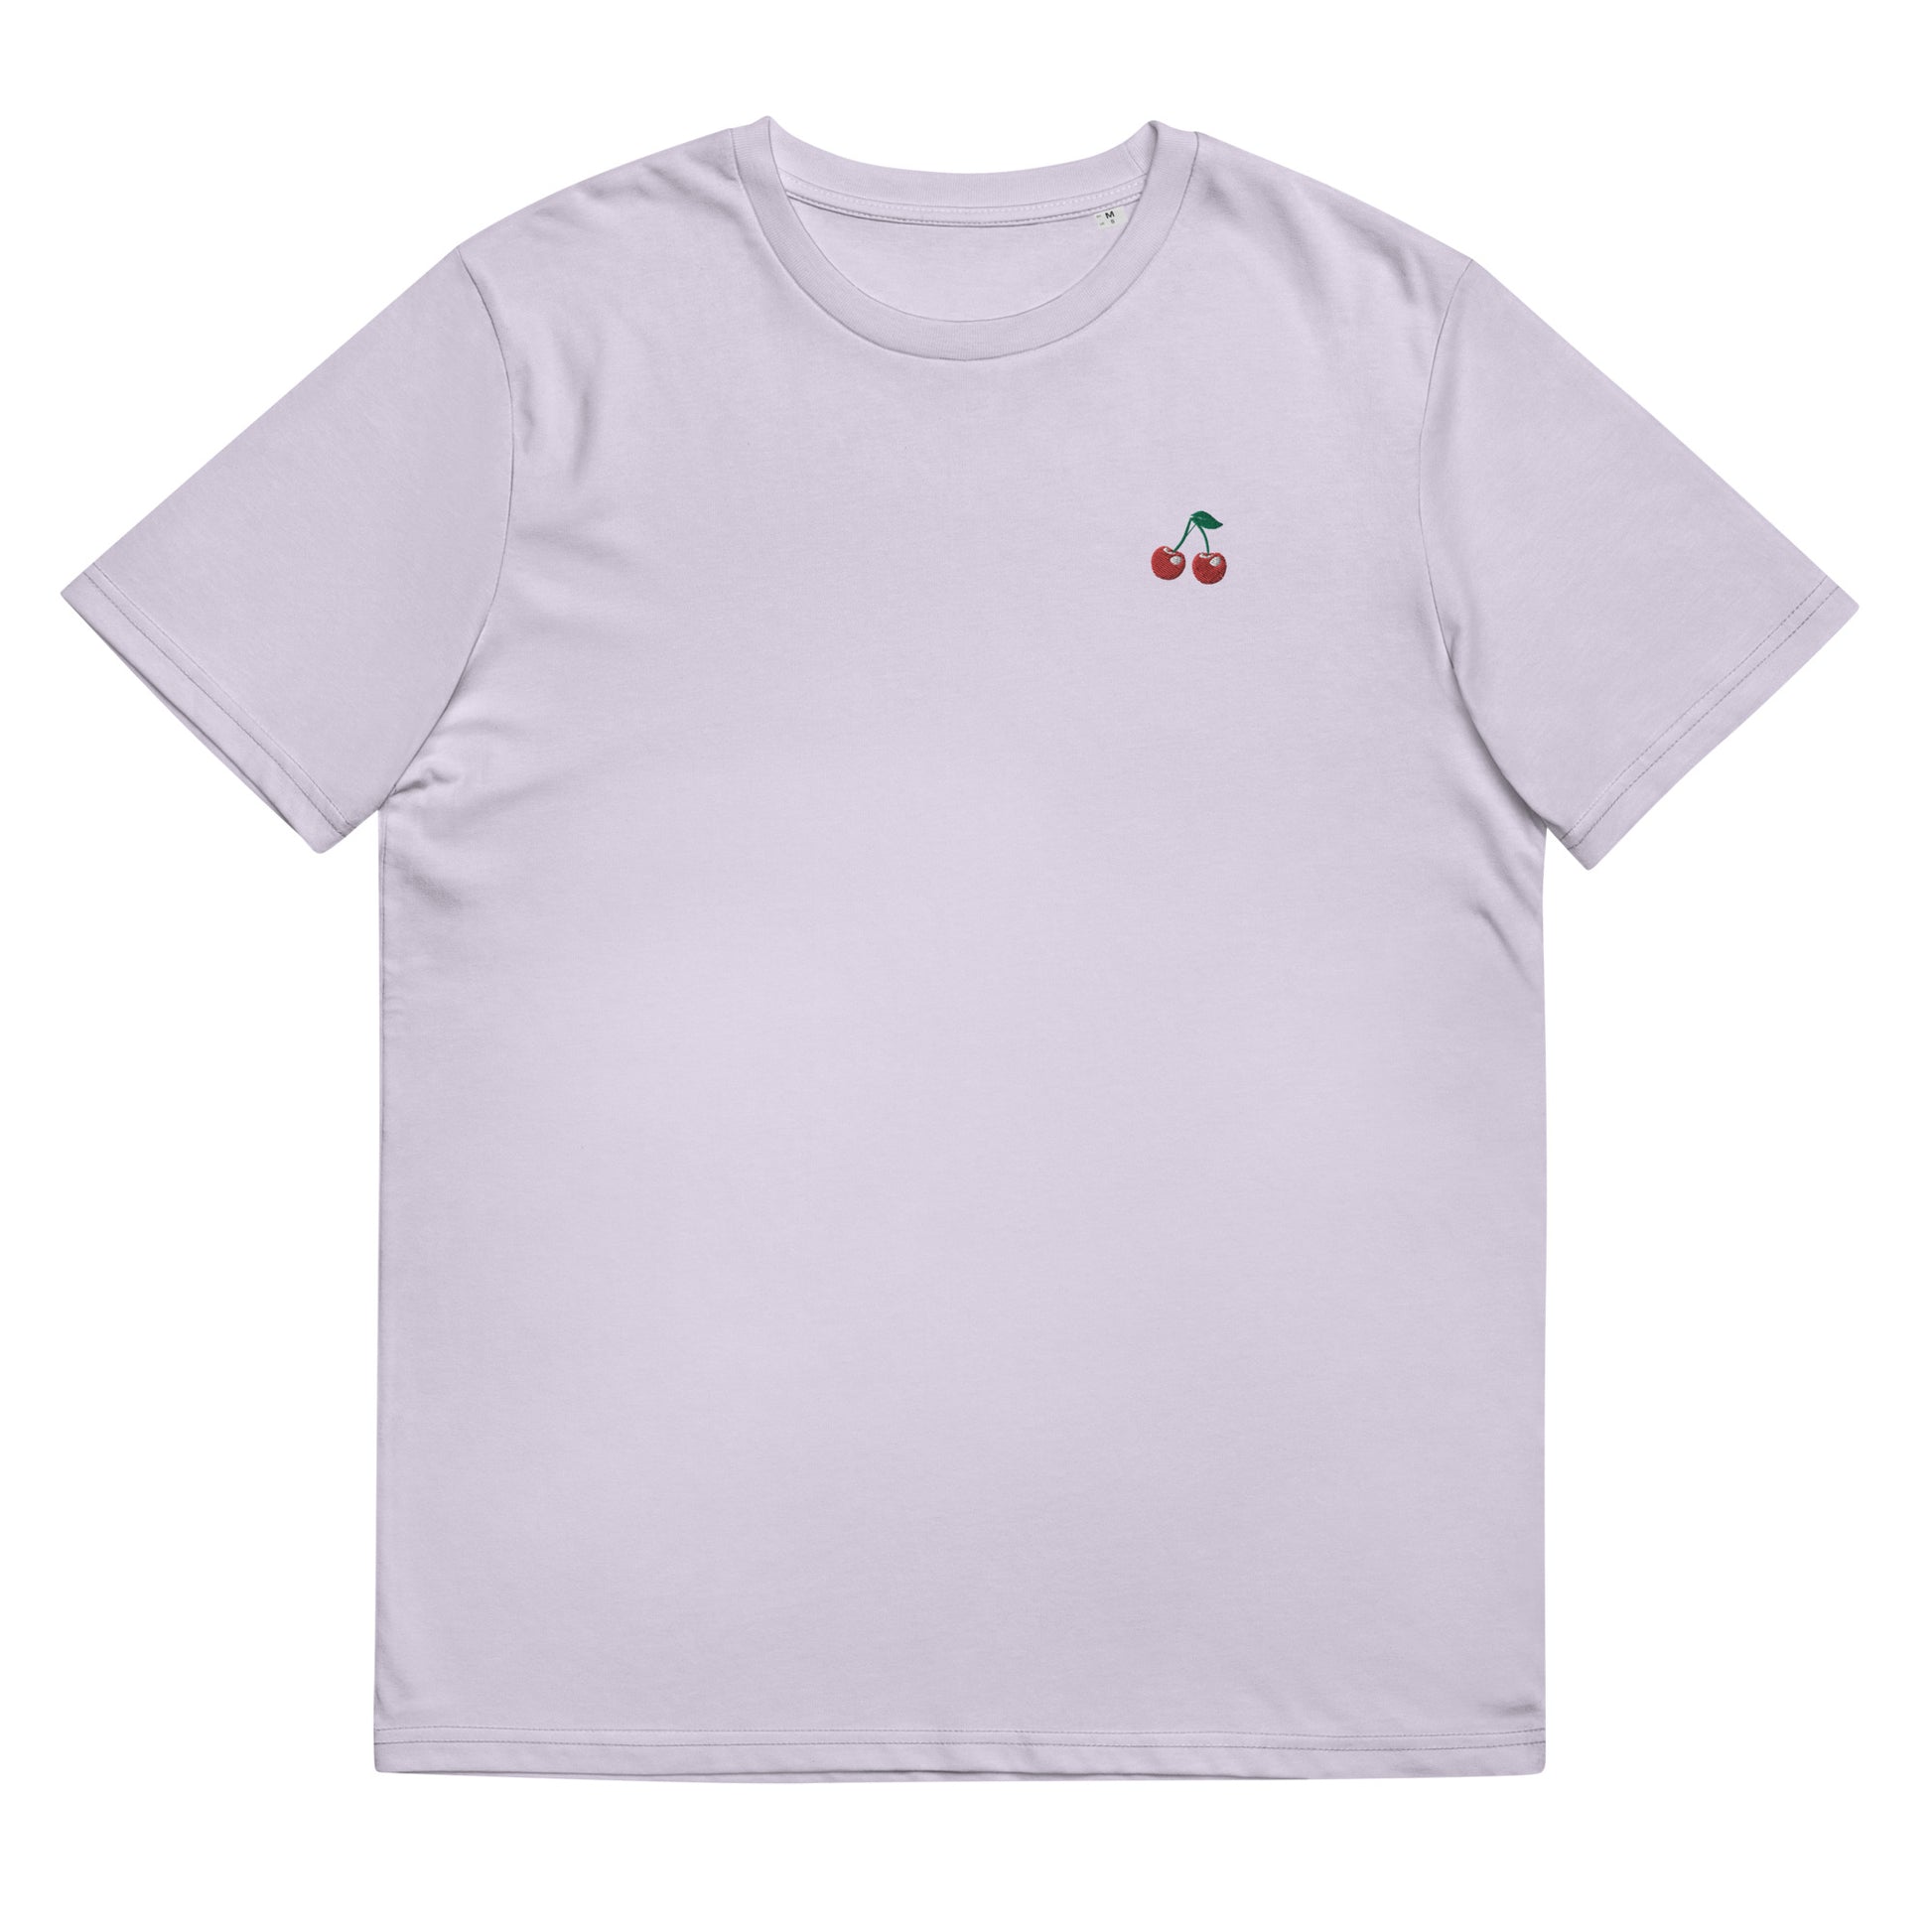 Fitted lavender organic cotton t-shirt with small embroidered red cherries on the left chest. Available in sizes S to 3XL.